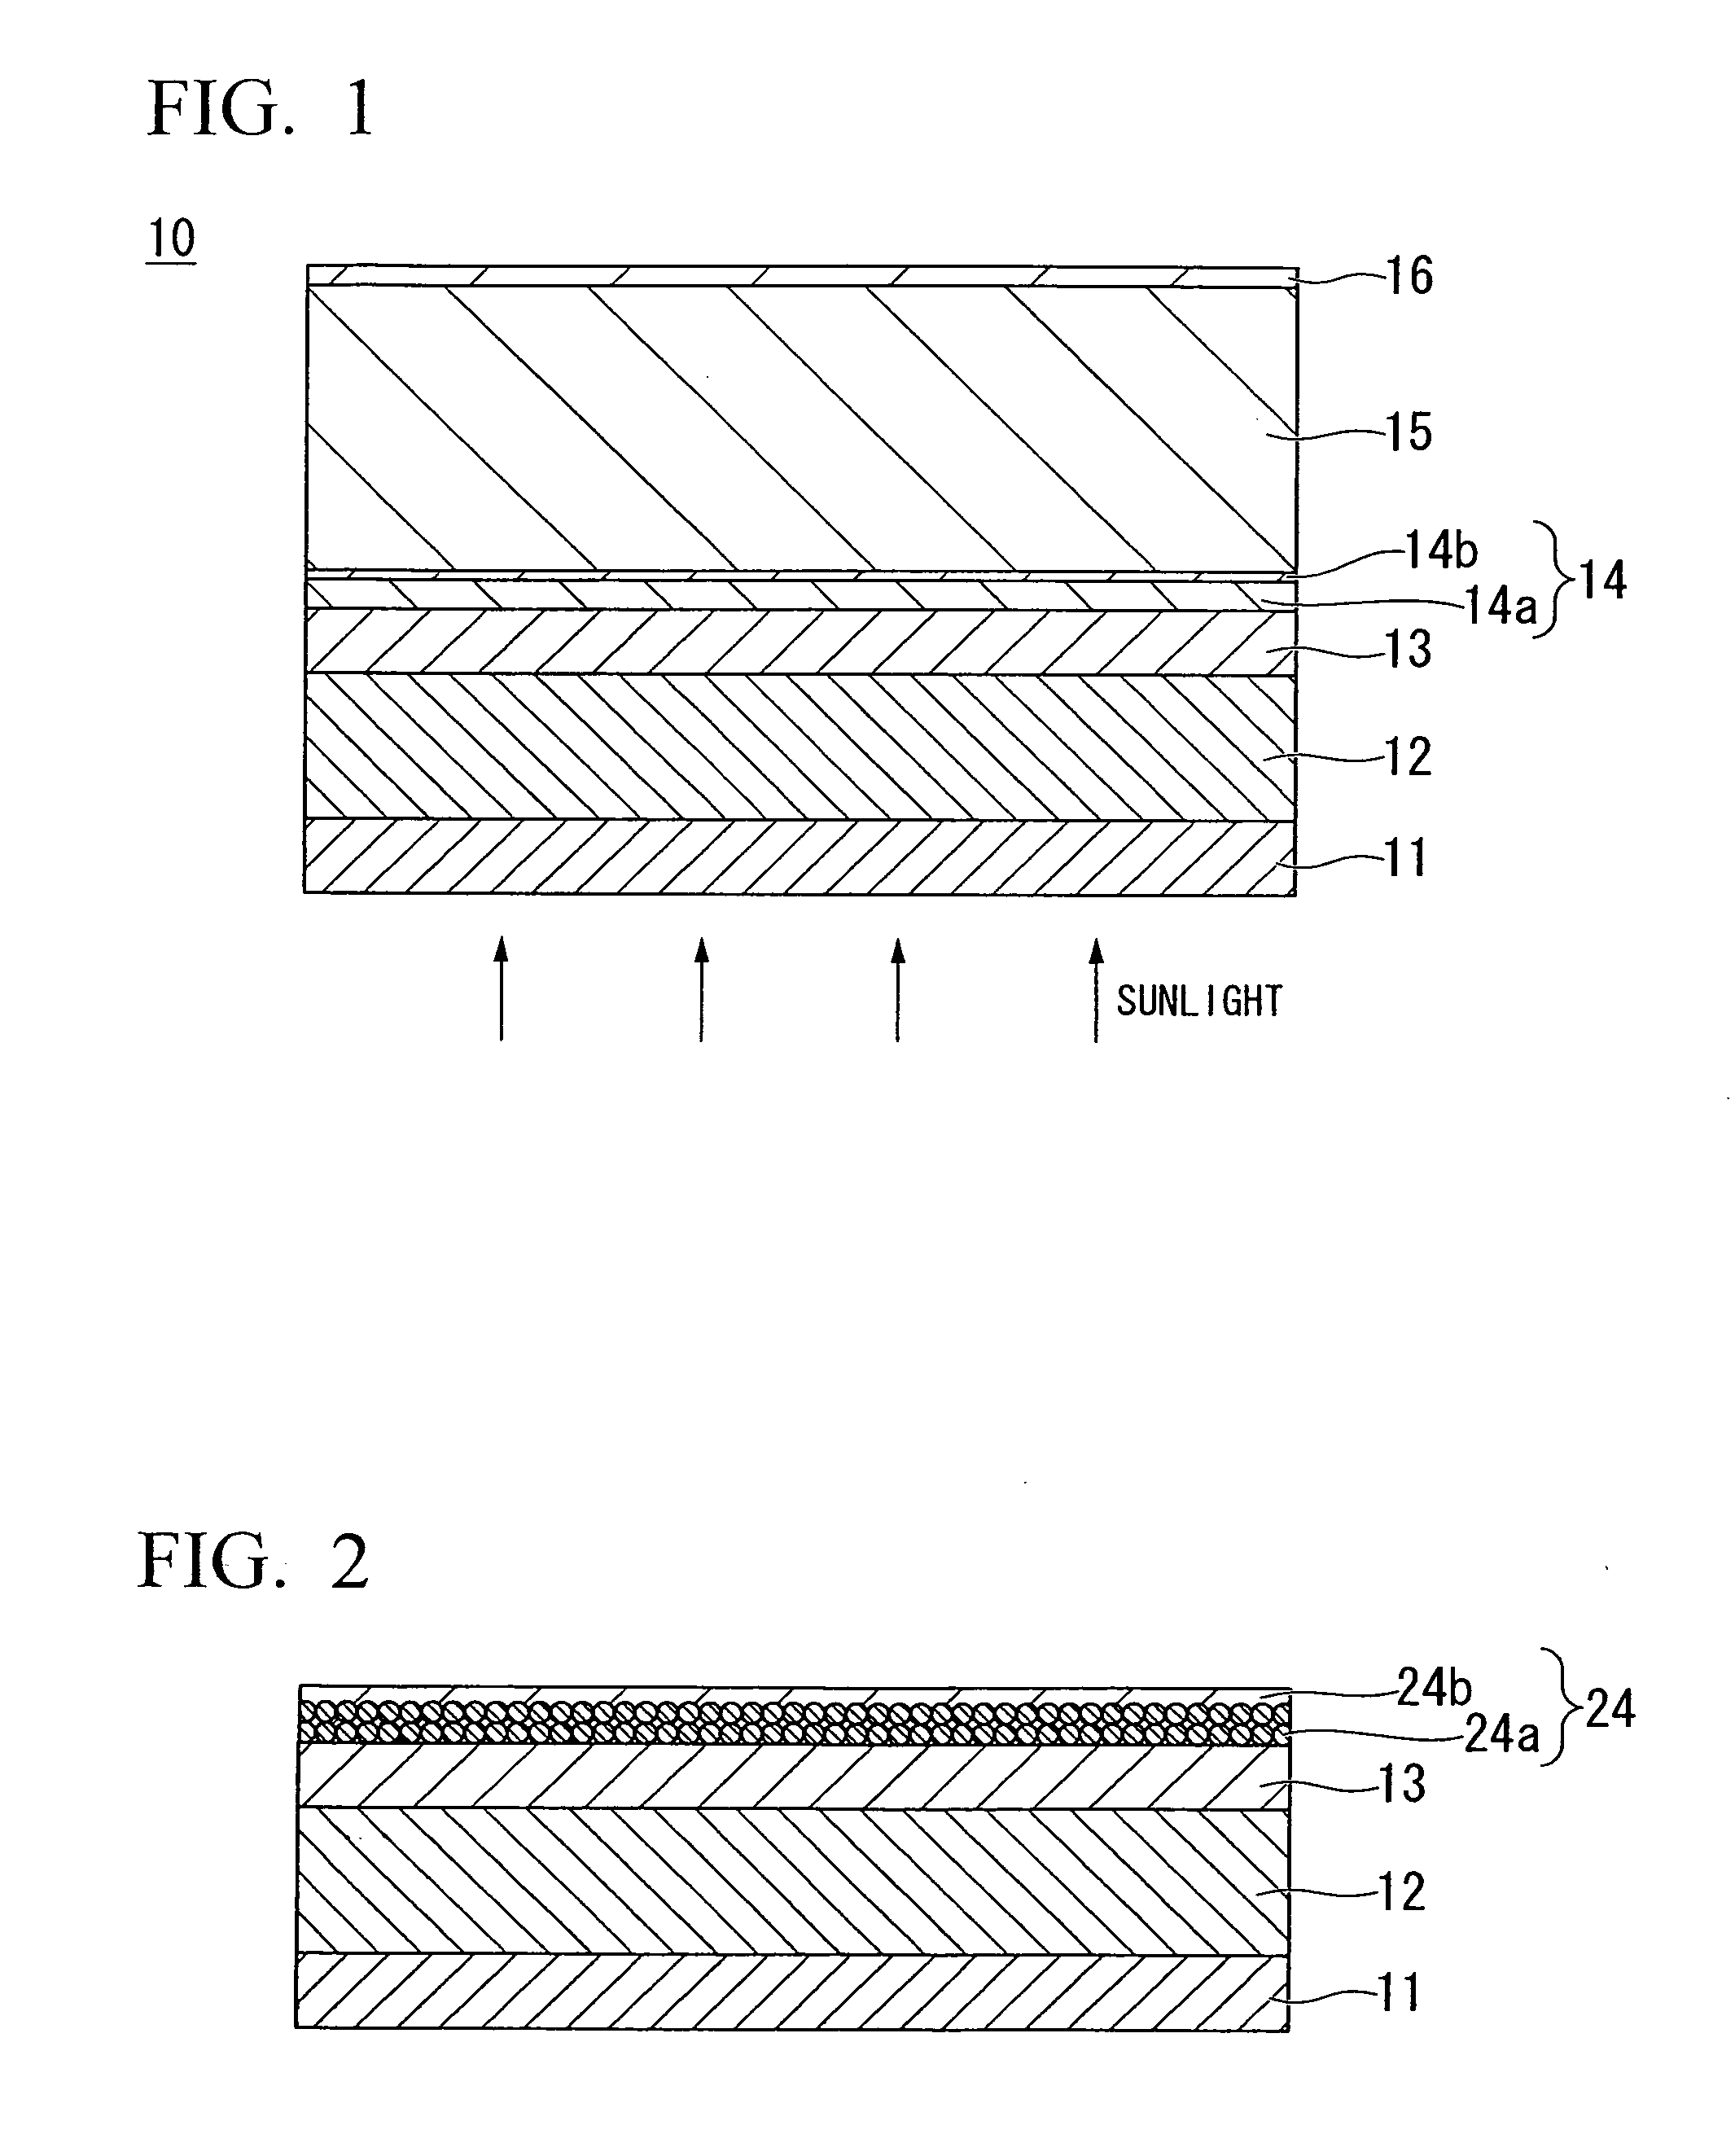 Transparent electroconductive film for solar cell, composition for transparent electroconductive film and multi-junction solar cell